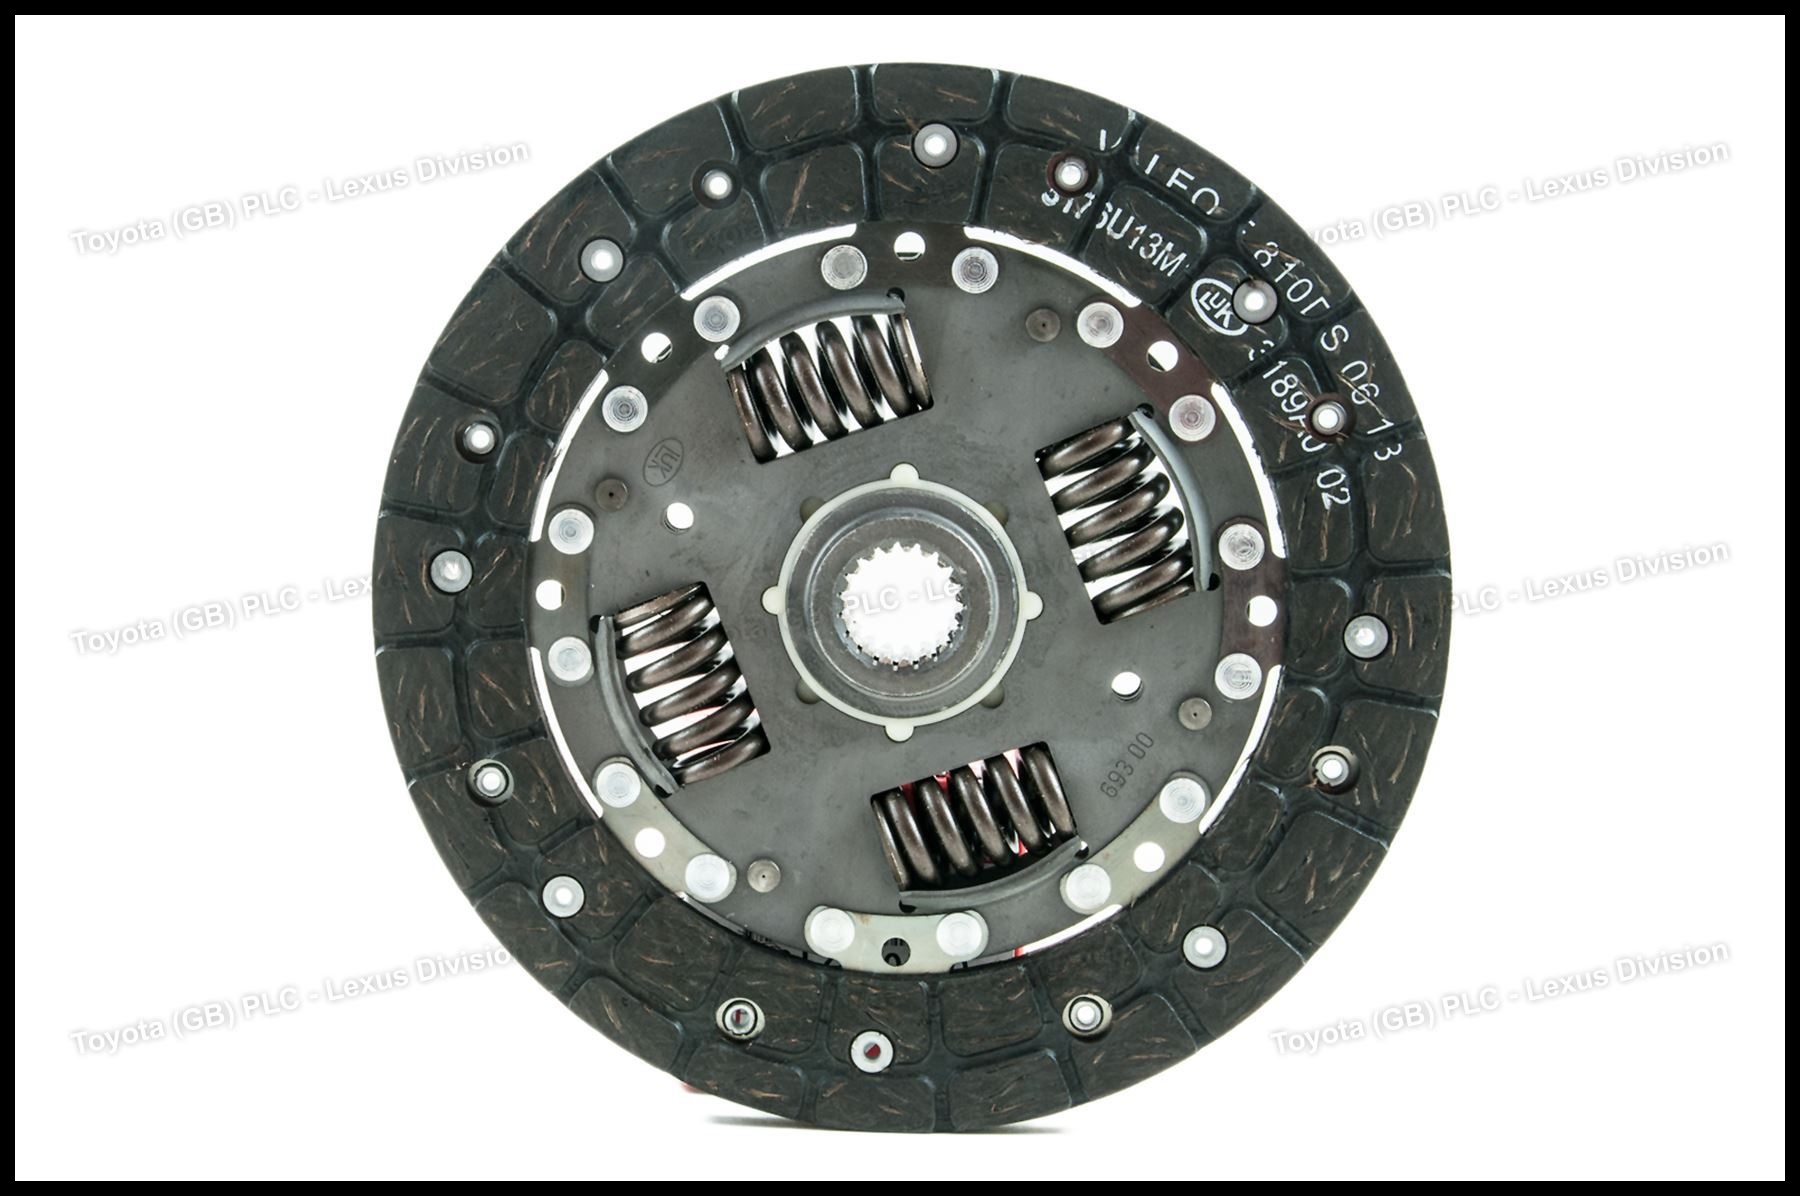 Genuine OEM Toyota Yaris Clutch Disc Assembly Friction Plate D051